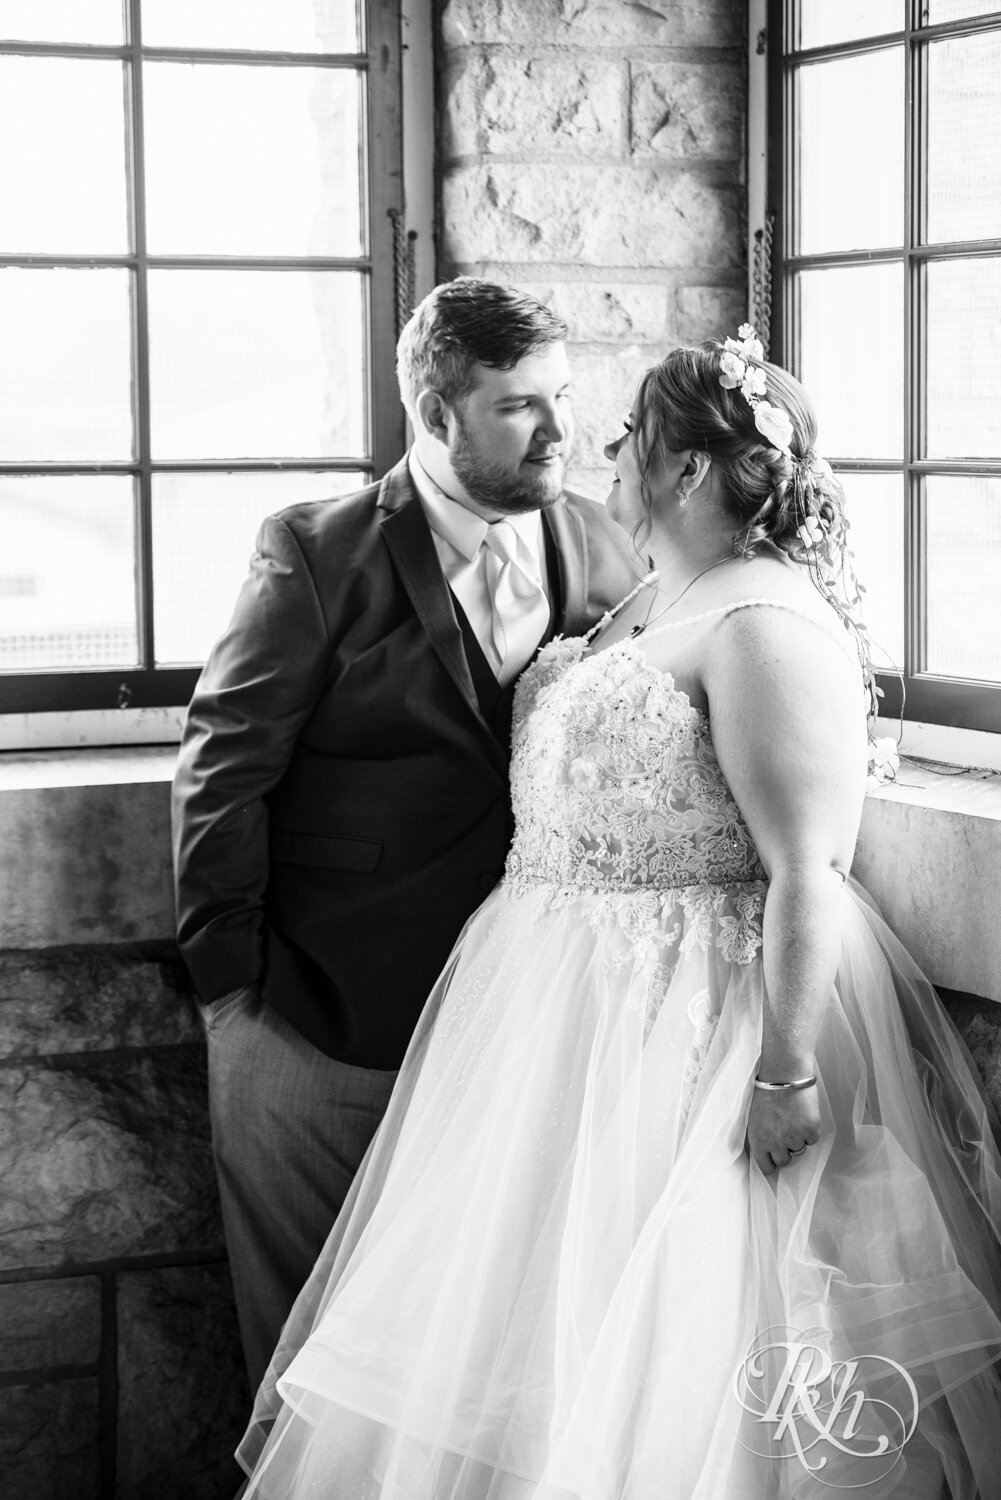 Plus size bride and groom stand by window at wedding at Olmsted County Fairgrounds in Rochester, Minnesota.